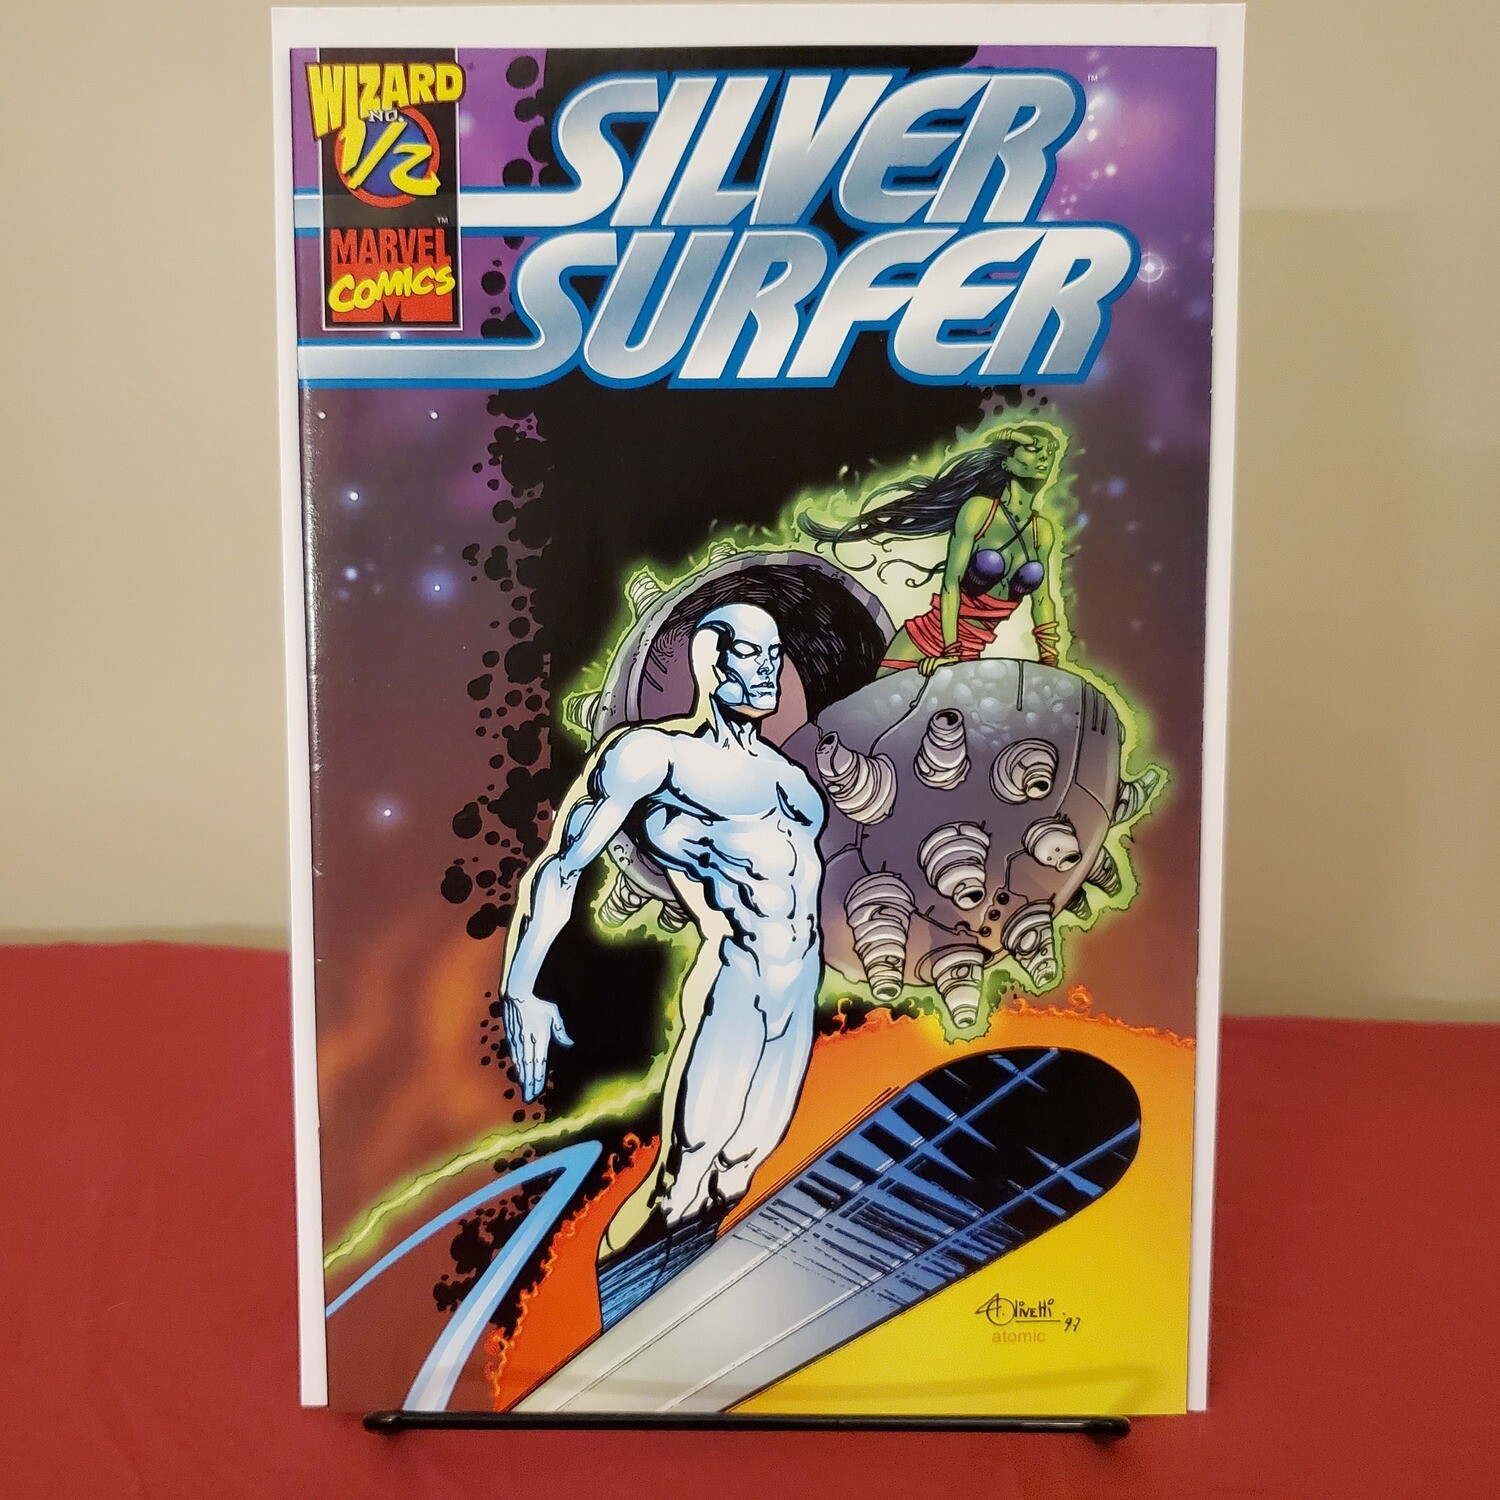 Silver Surfer Wizard 1/2 #1 NM